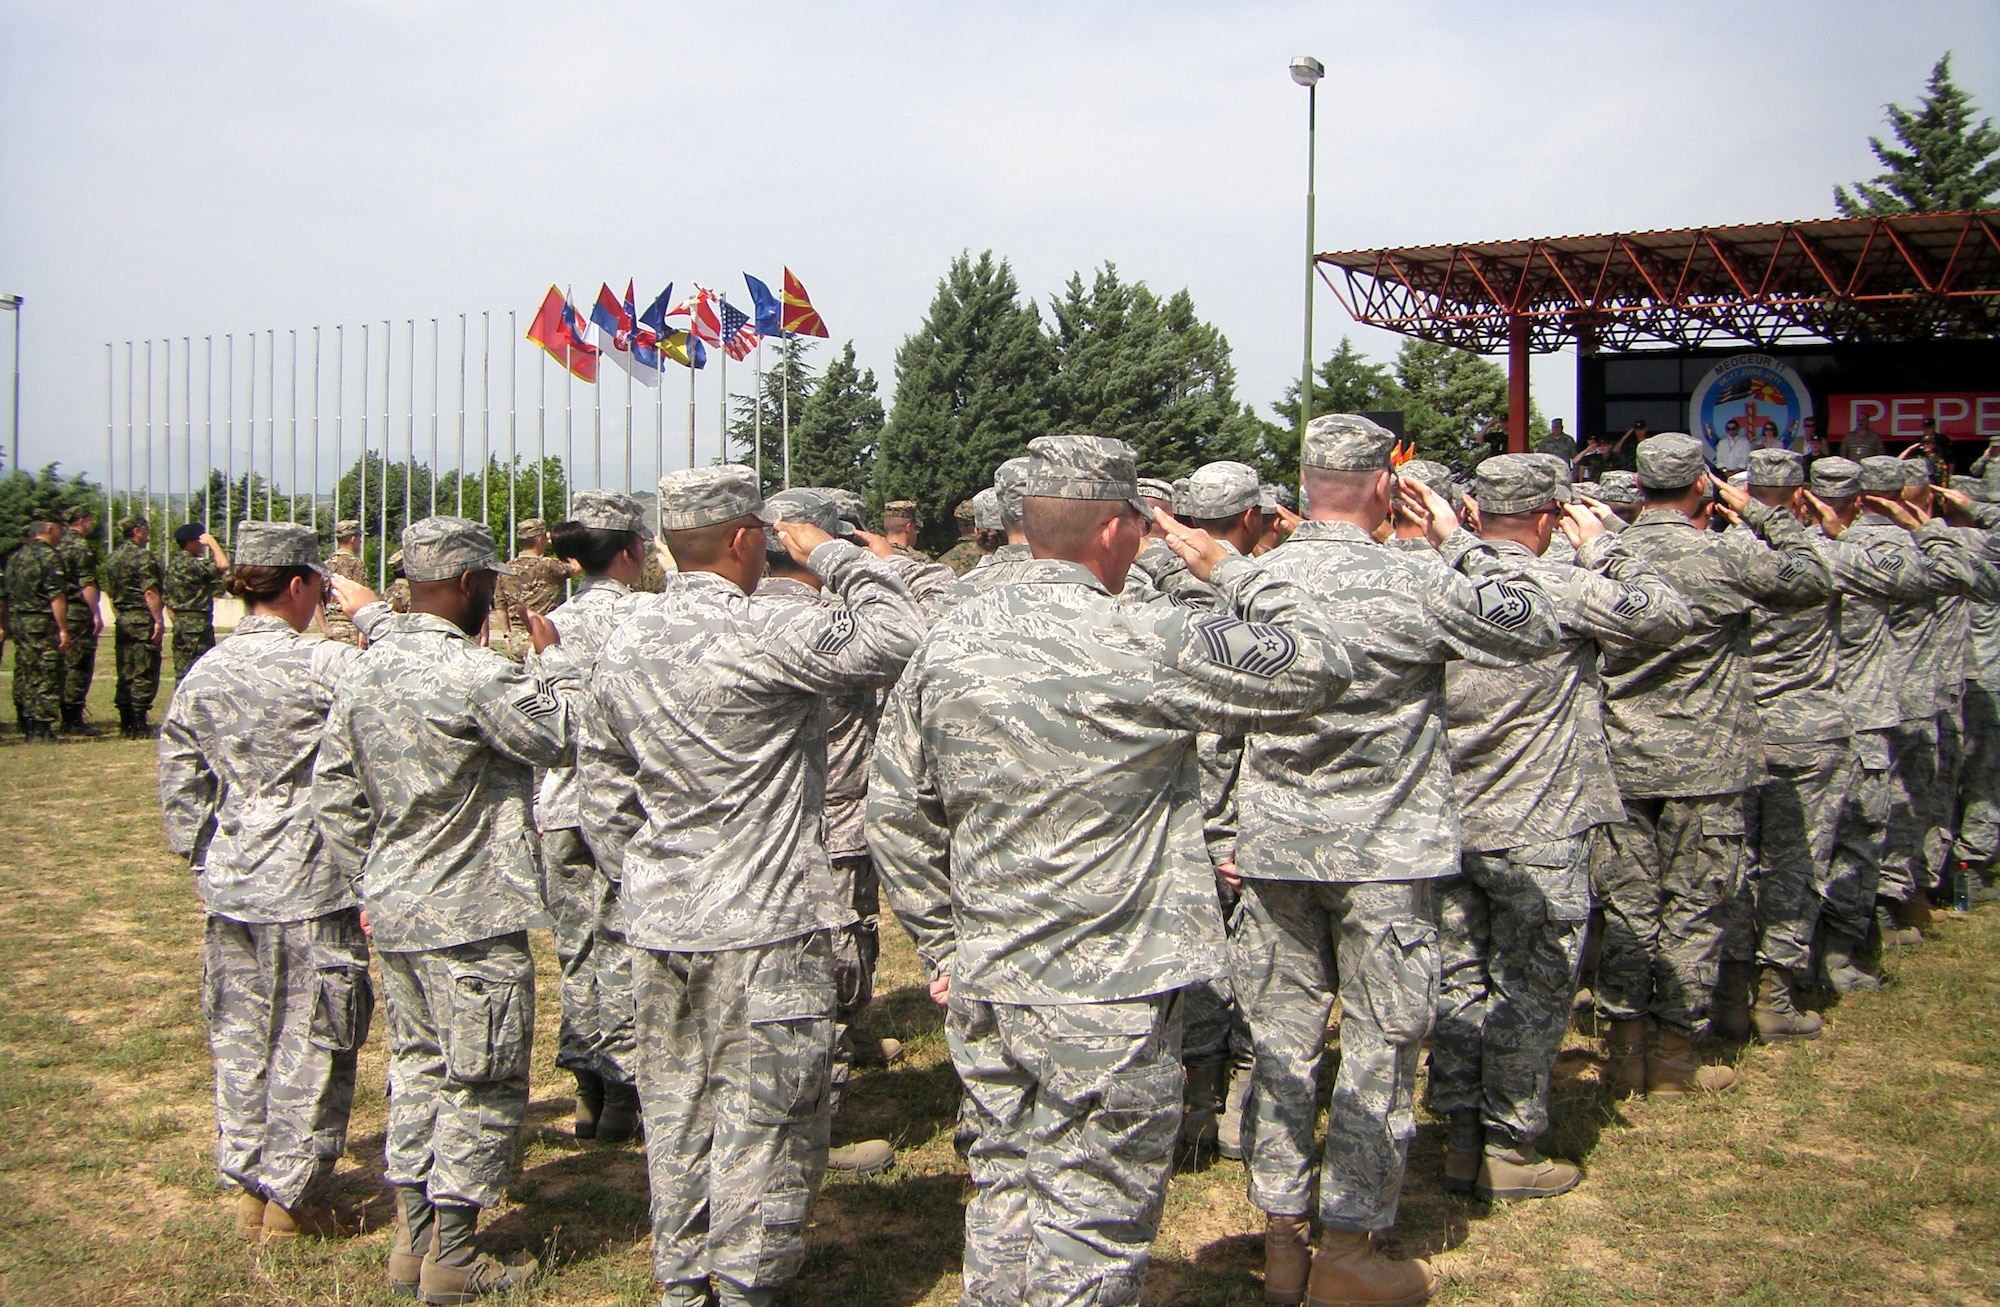 CAMP PEPELISHTE, Macedonia -- Members of the United States Air Force and Army salute during the Macedonian and American National Anthems at the opening ceremony of Medical Training Exercise in Central and Eastern Europe 2011 here June 6.  The countries participating in this year’s MEDCEUR are Macedonia, Montenegro, Bosnia and Herzegovina, Serbia, Slovenia, Norway and the United States.  MEDCEUR is a Partnership for Peace and chairman of the Joint Chiefs of Staff-sponsored regional and multilateral exercise in Central and Eastern Europe designed to provide medical training and operational experience in a deployed environment.  (U.S. Air Force photo/Master Sgt. Kelley J. Stewart)